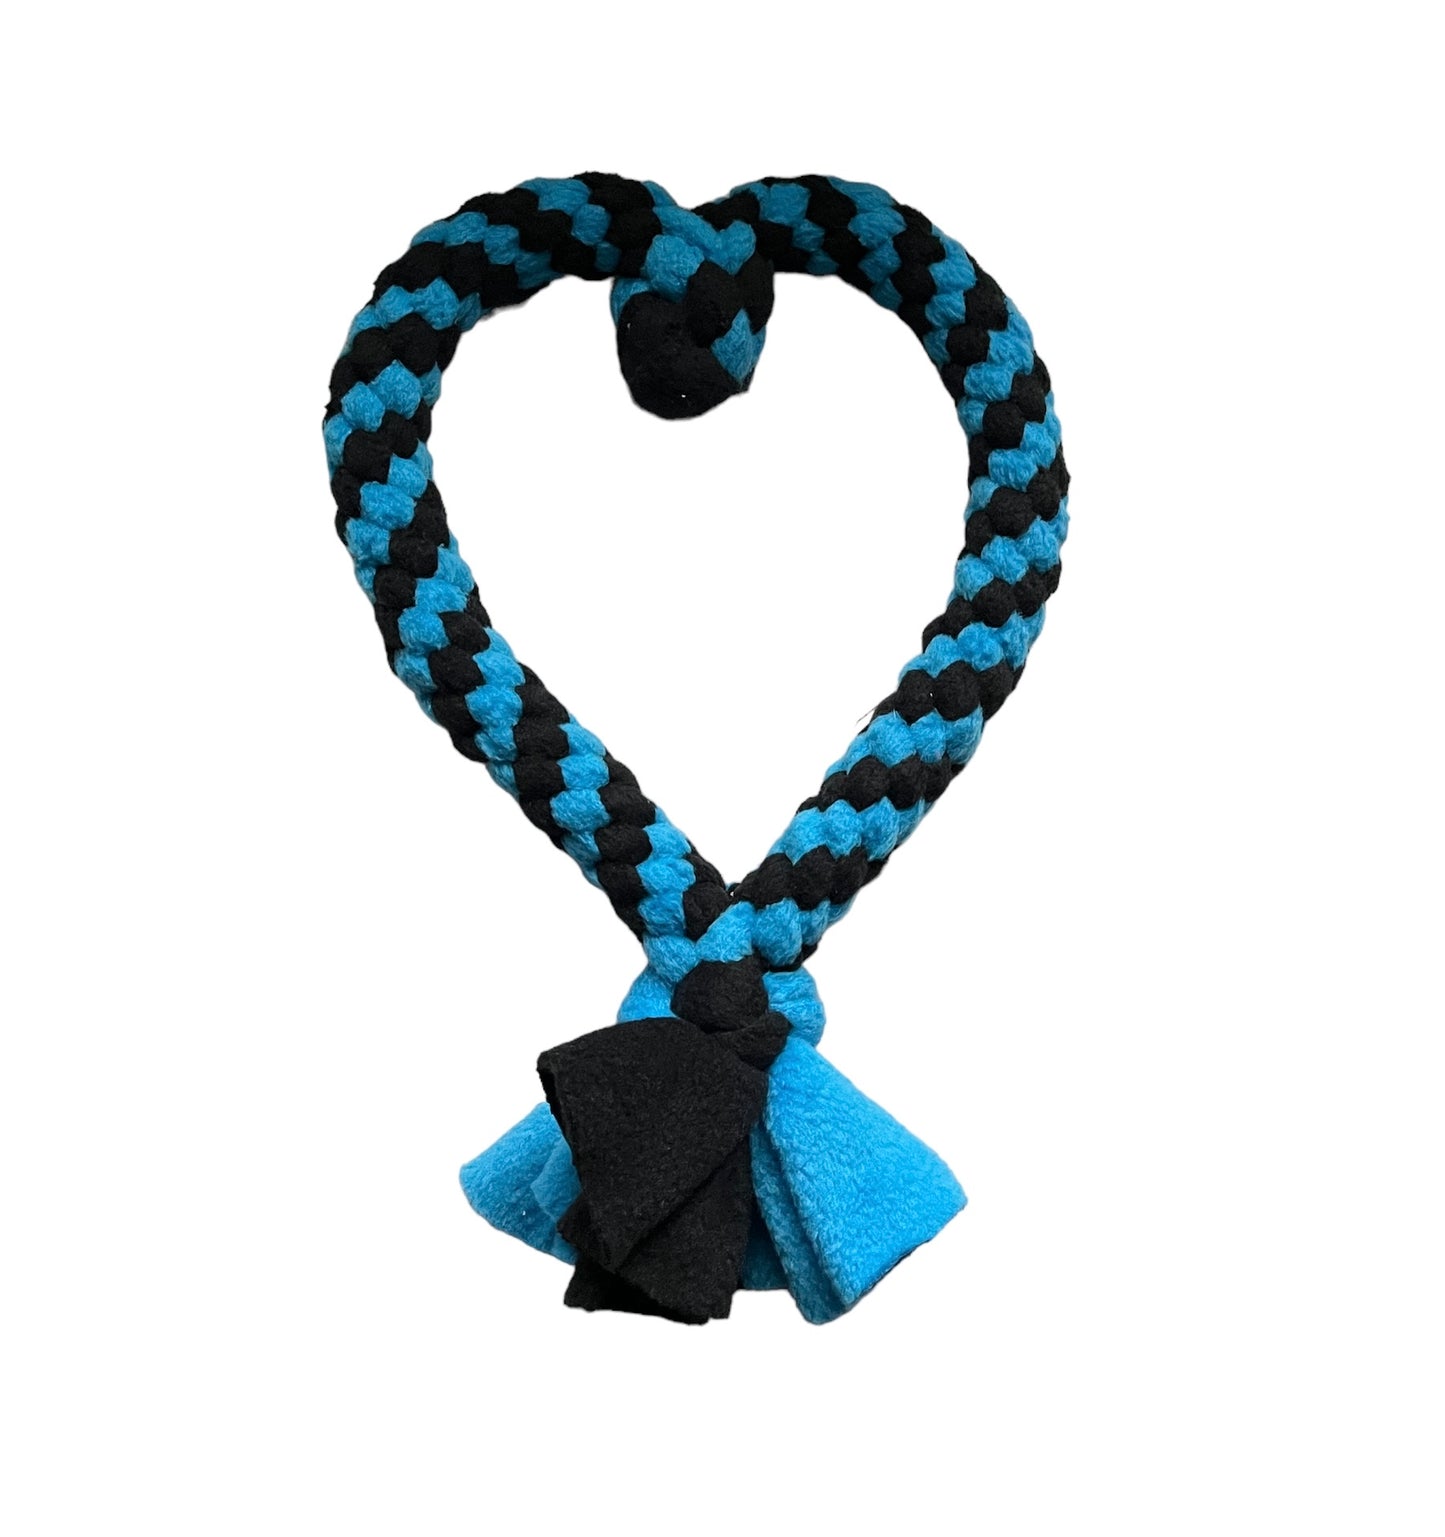 Heart shaped hand made tug toy create your own dog toy